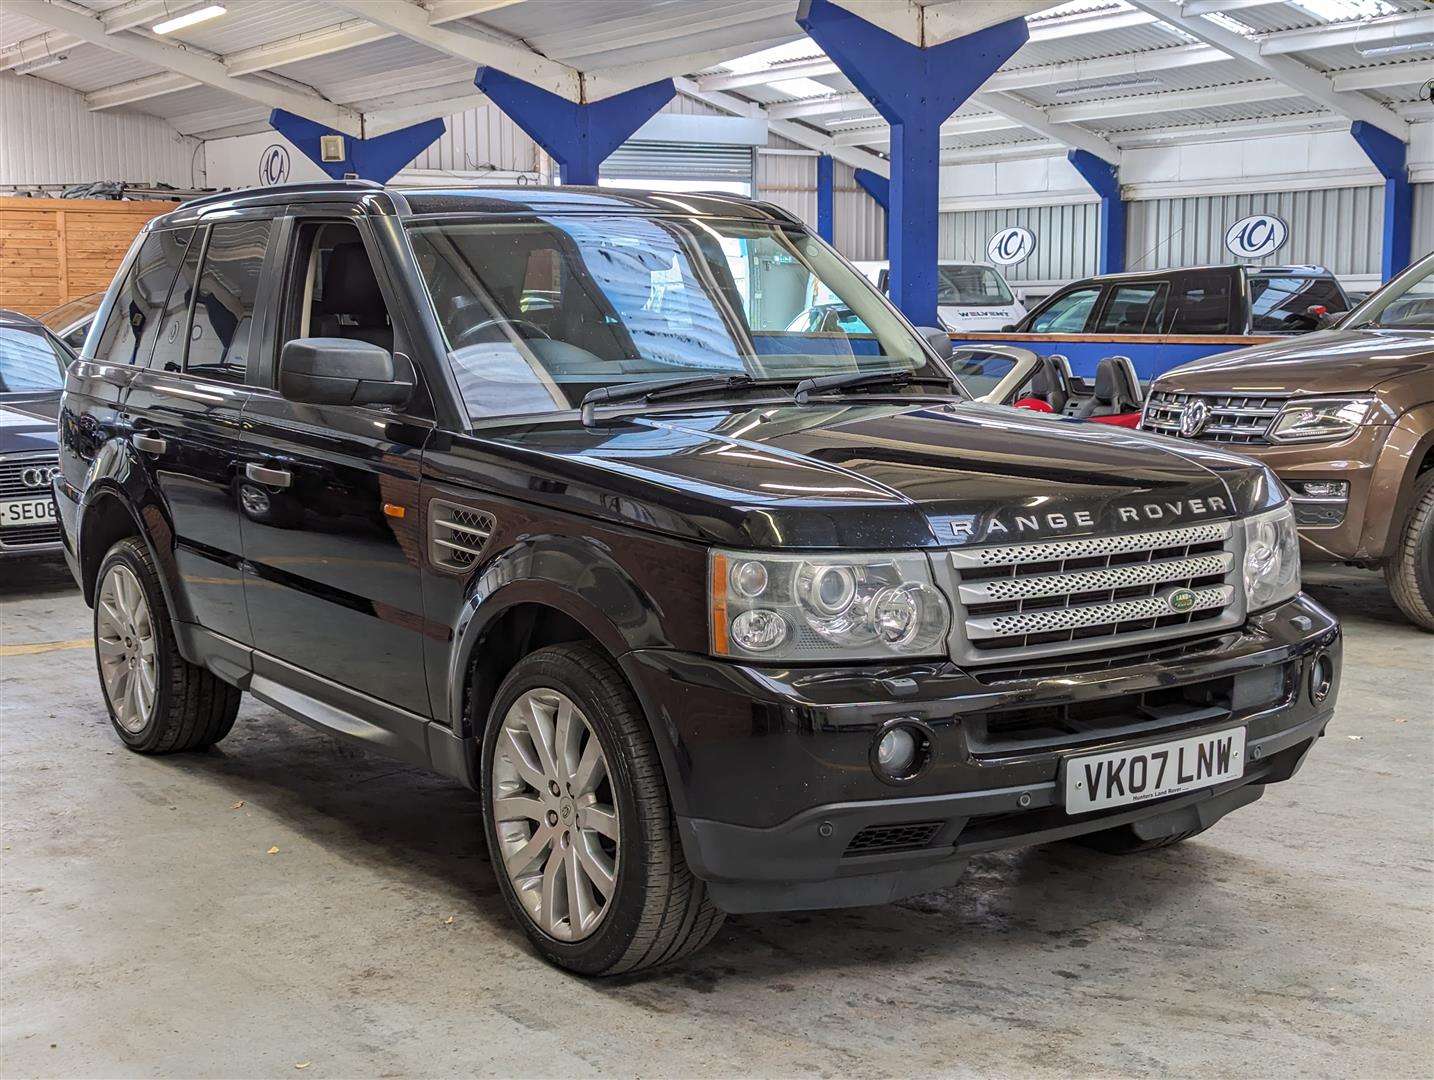 2007 LAND ROVER RANGE ROVER SP HSE TDV8 AUTO - Image 10 of 30